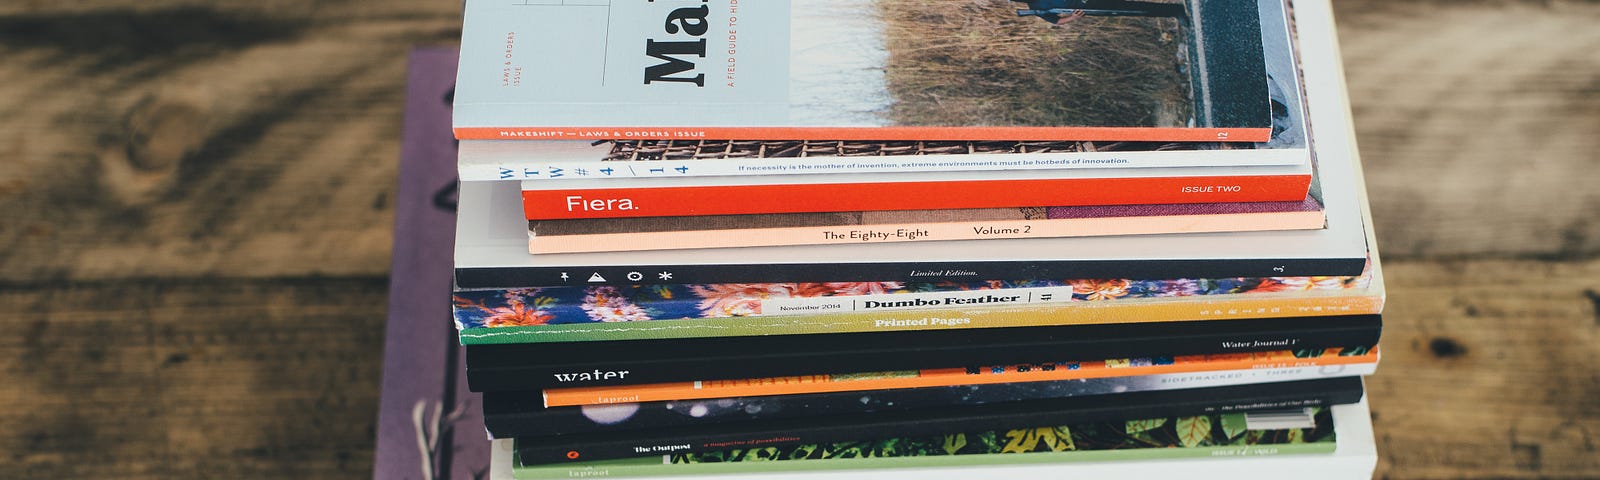 A stack of well-worn magazines sits on a wooden desk.